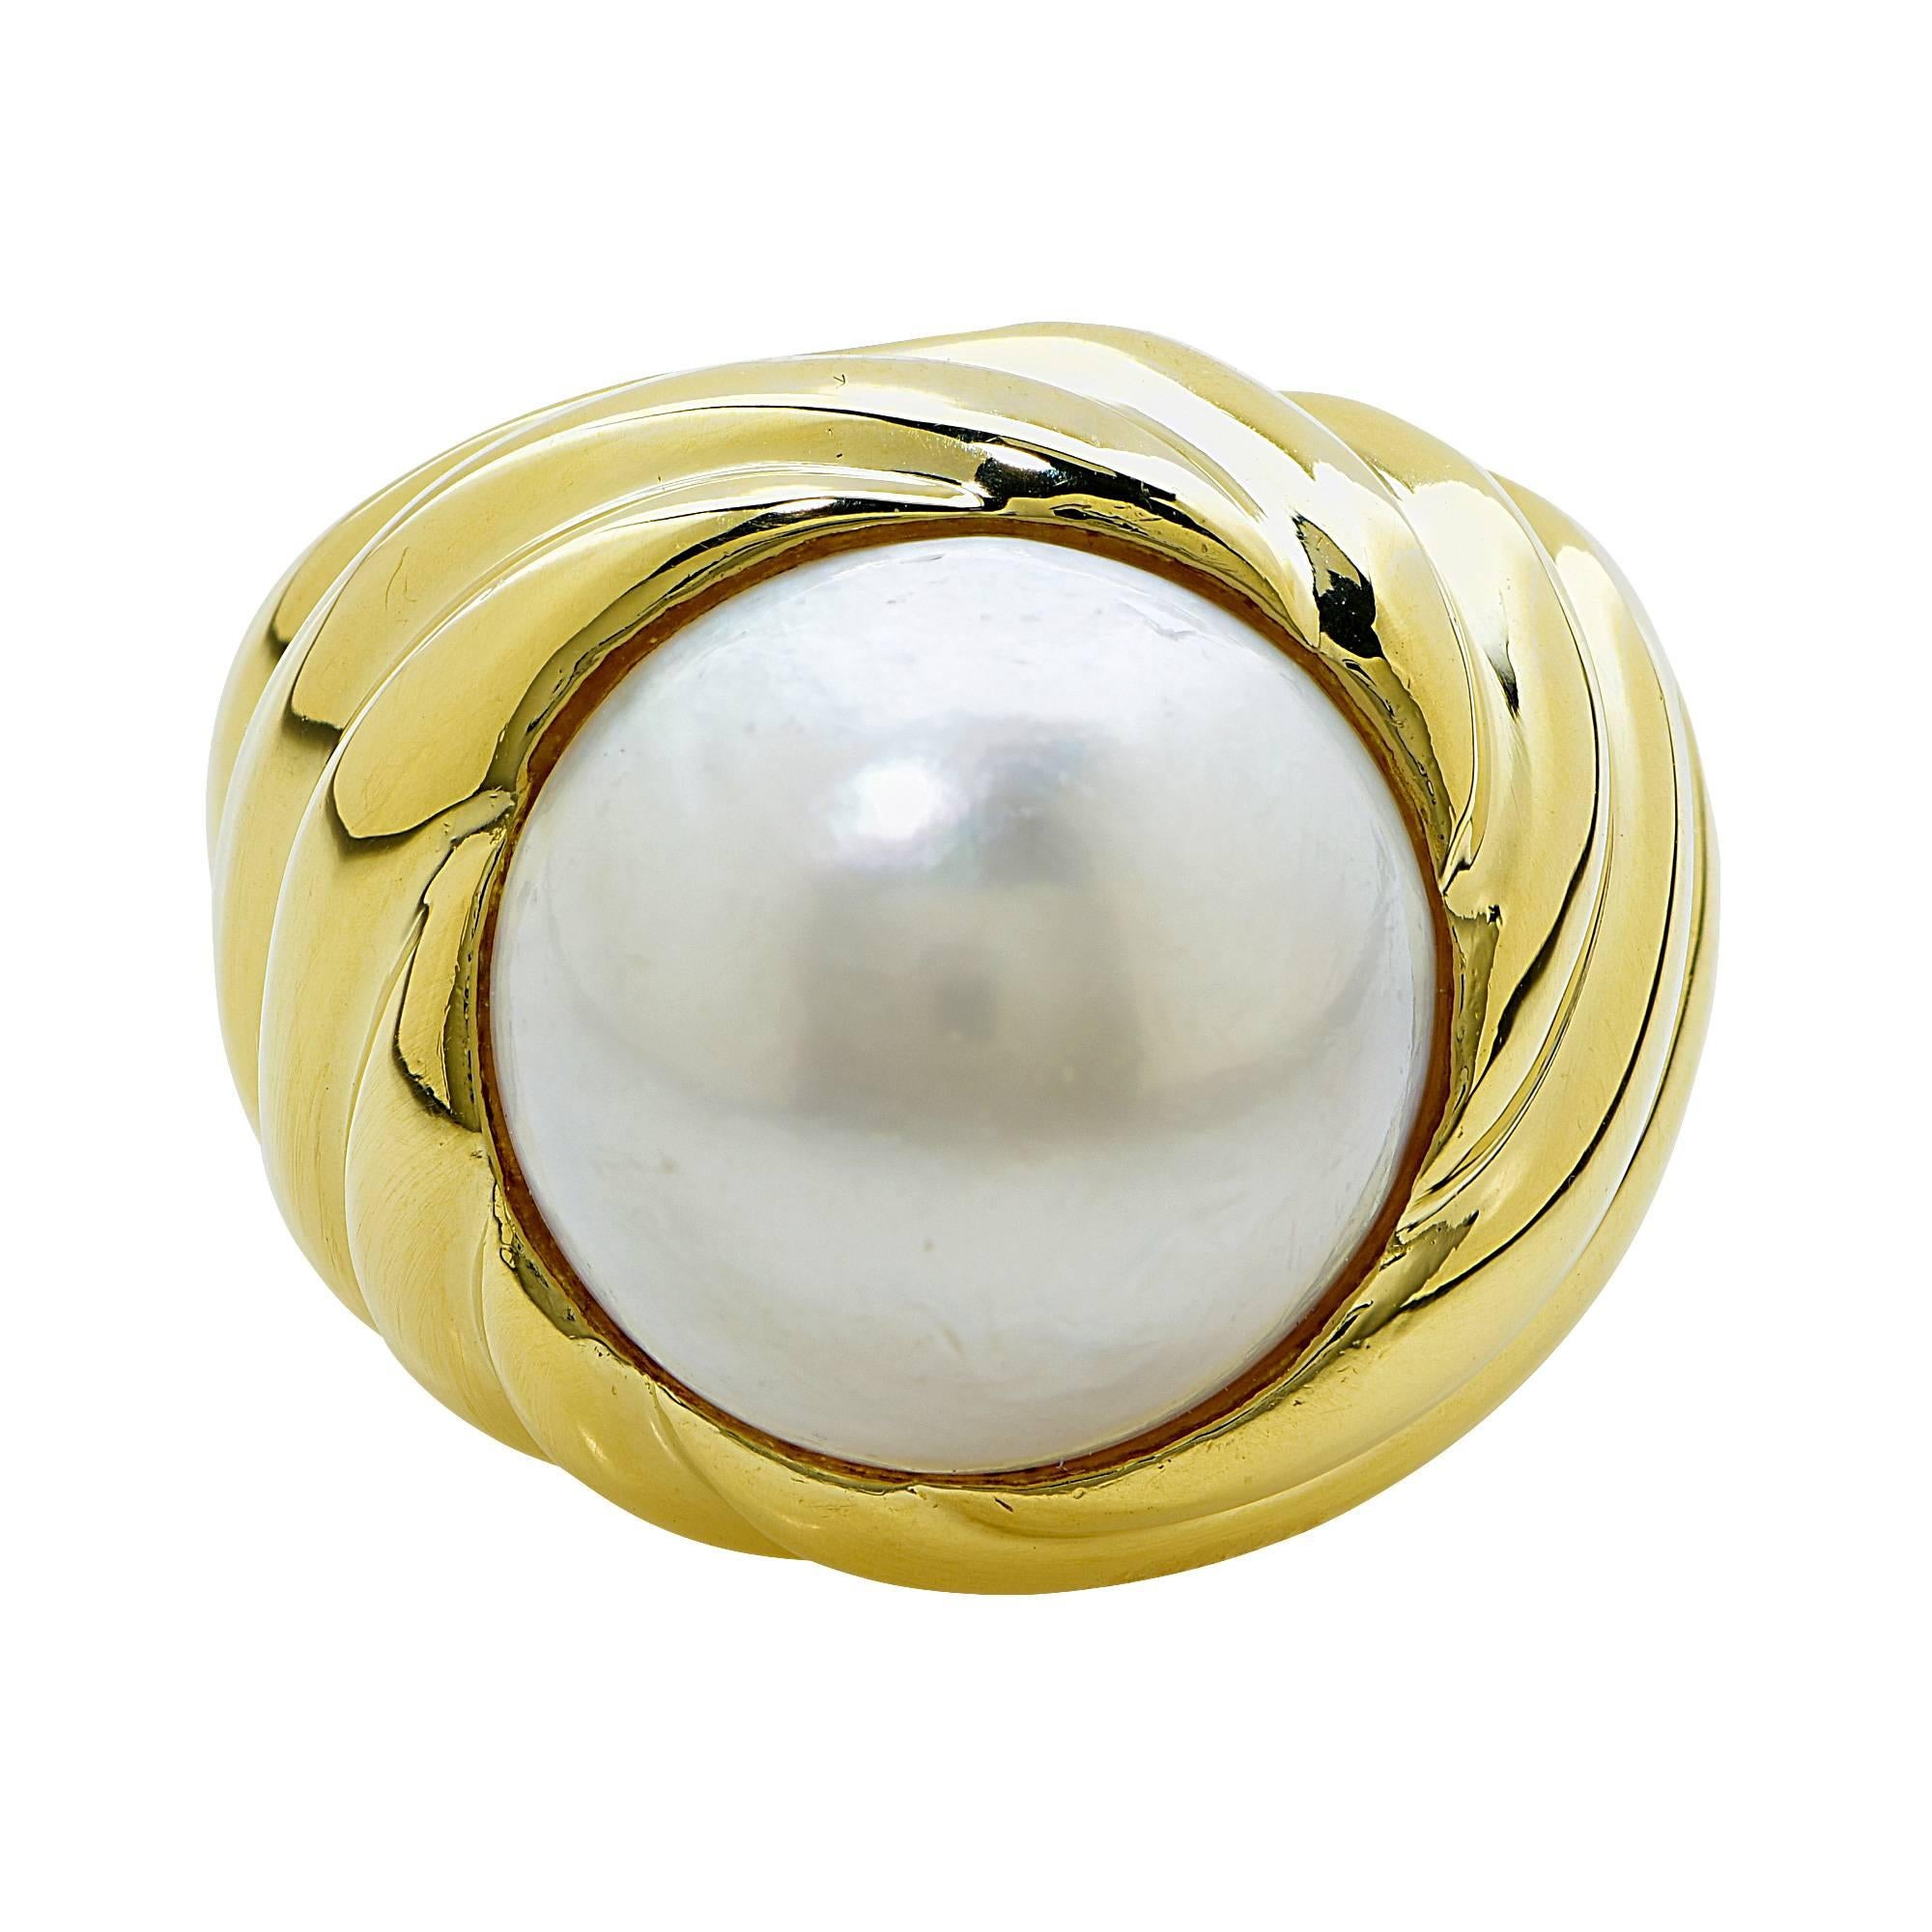 18k yellow gold Tiffany & Co. ring featuring a 14.7mm, Mabe pearl.

Ring size: 7 (cannot be sized up or down)
Metal weight: 17.58 grams

This pearl ring is accompanied by a retail appraisal performed by a GIA Graduate Gemologist.